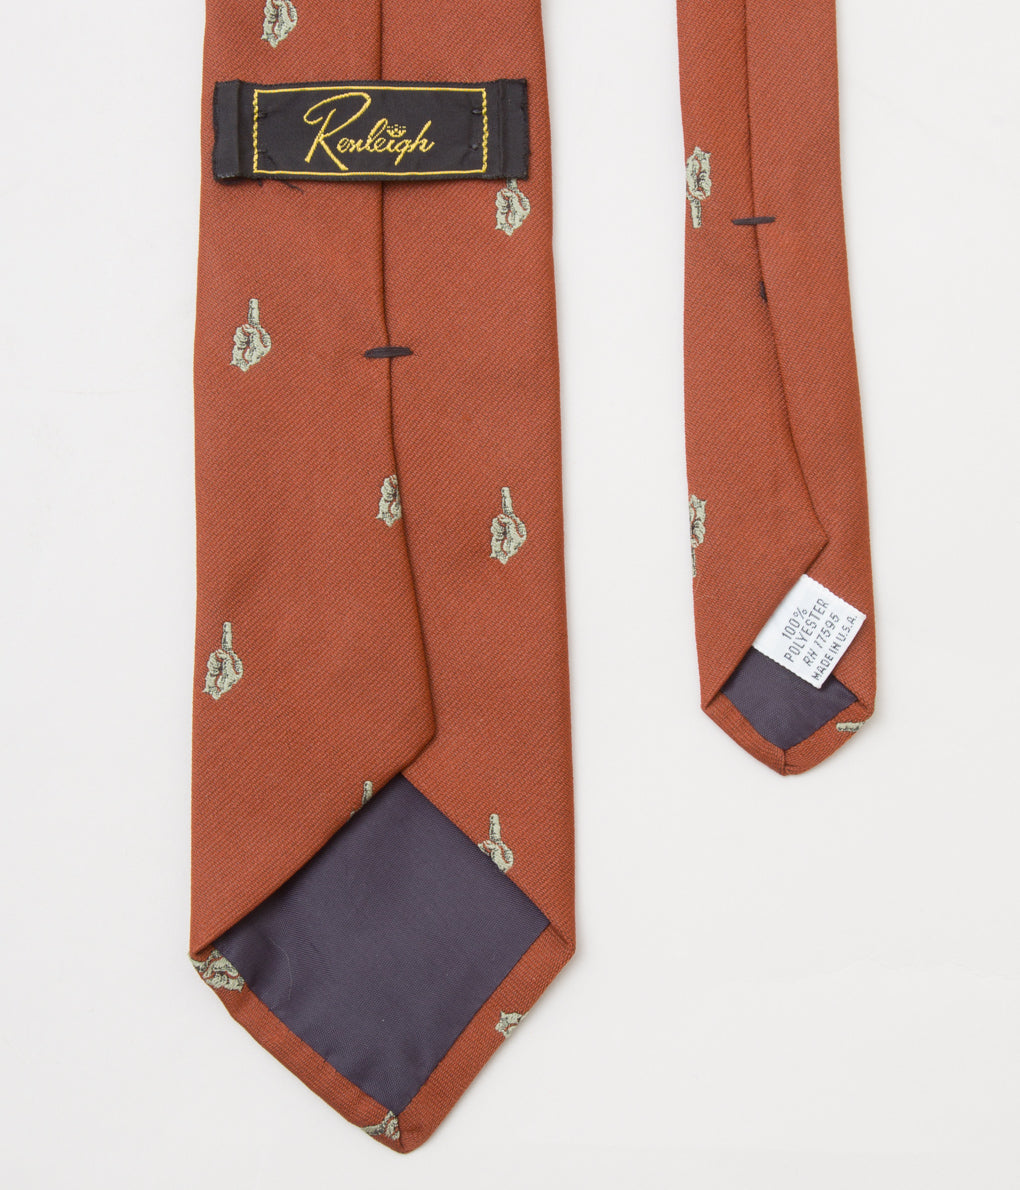 FROM USA "VINTAGE EMBROIDERED TIE HAND SIGN"(BRICK)